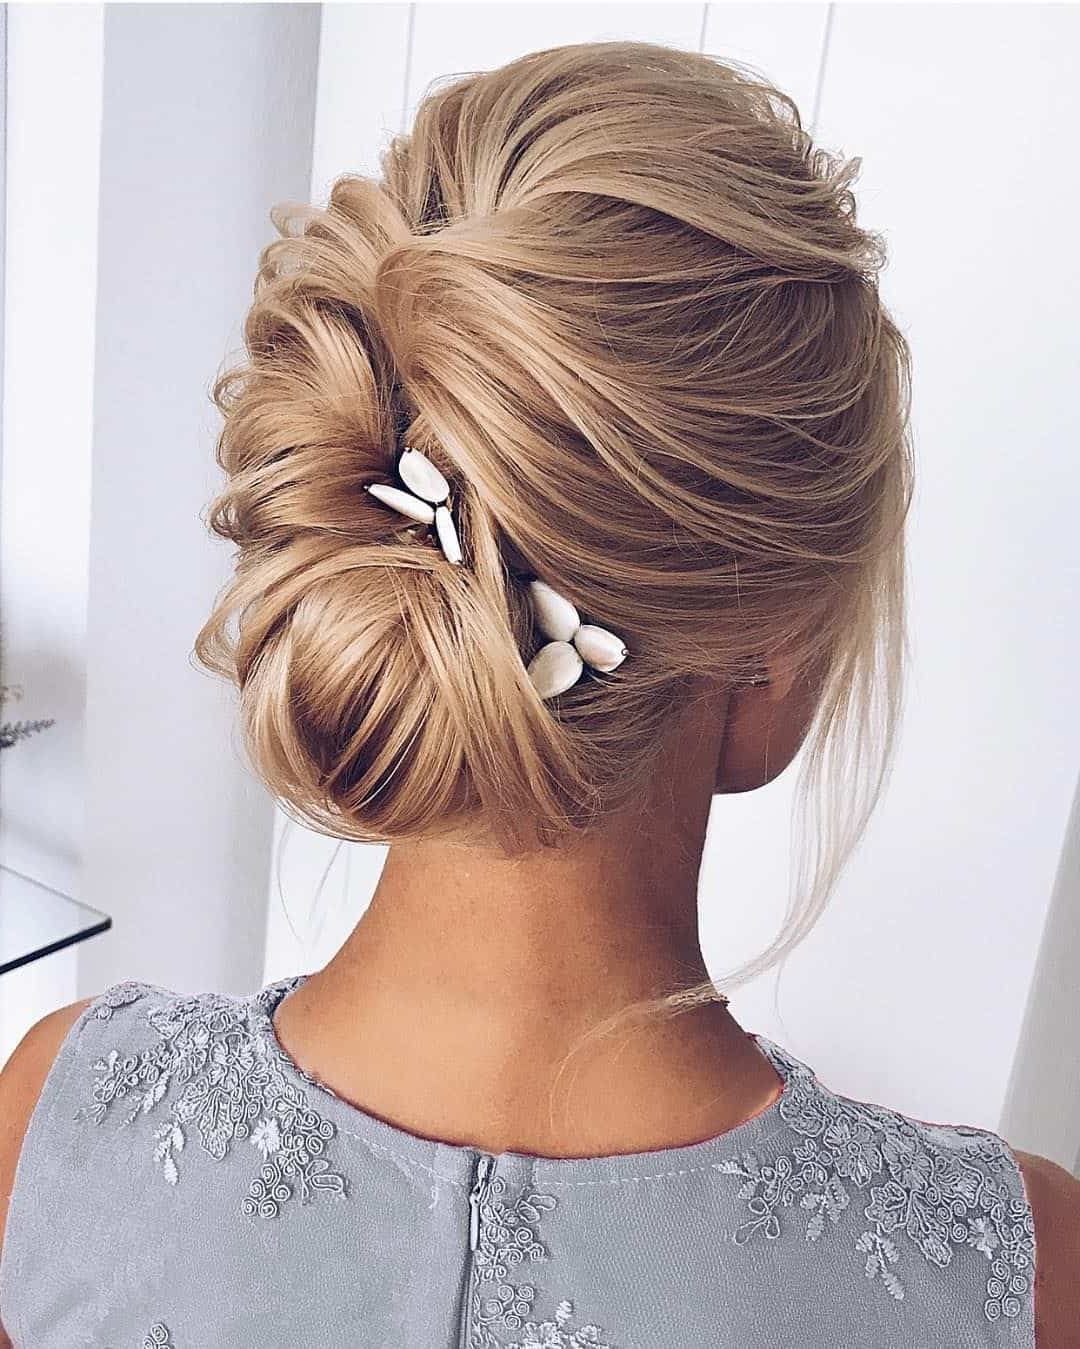 Most Recently Released Complex Looking Prom Updos With Variety Of Textures Intended For Best 10 Prom Hairstyles That Can Rock The Dance Floor! (View 11 of 20)